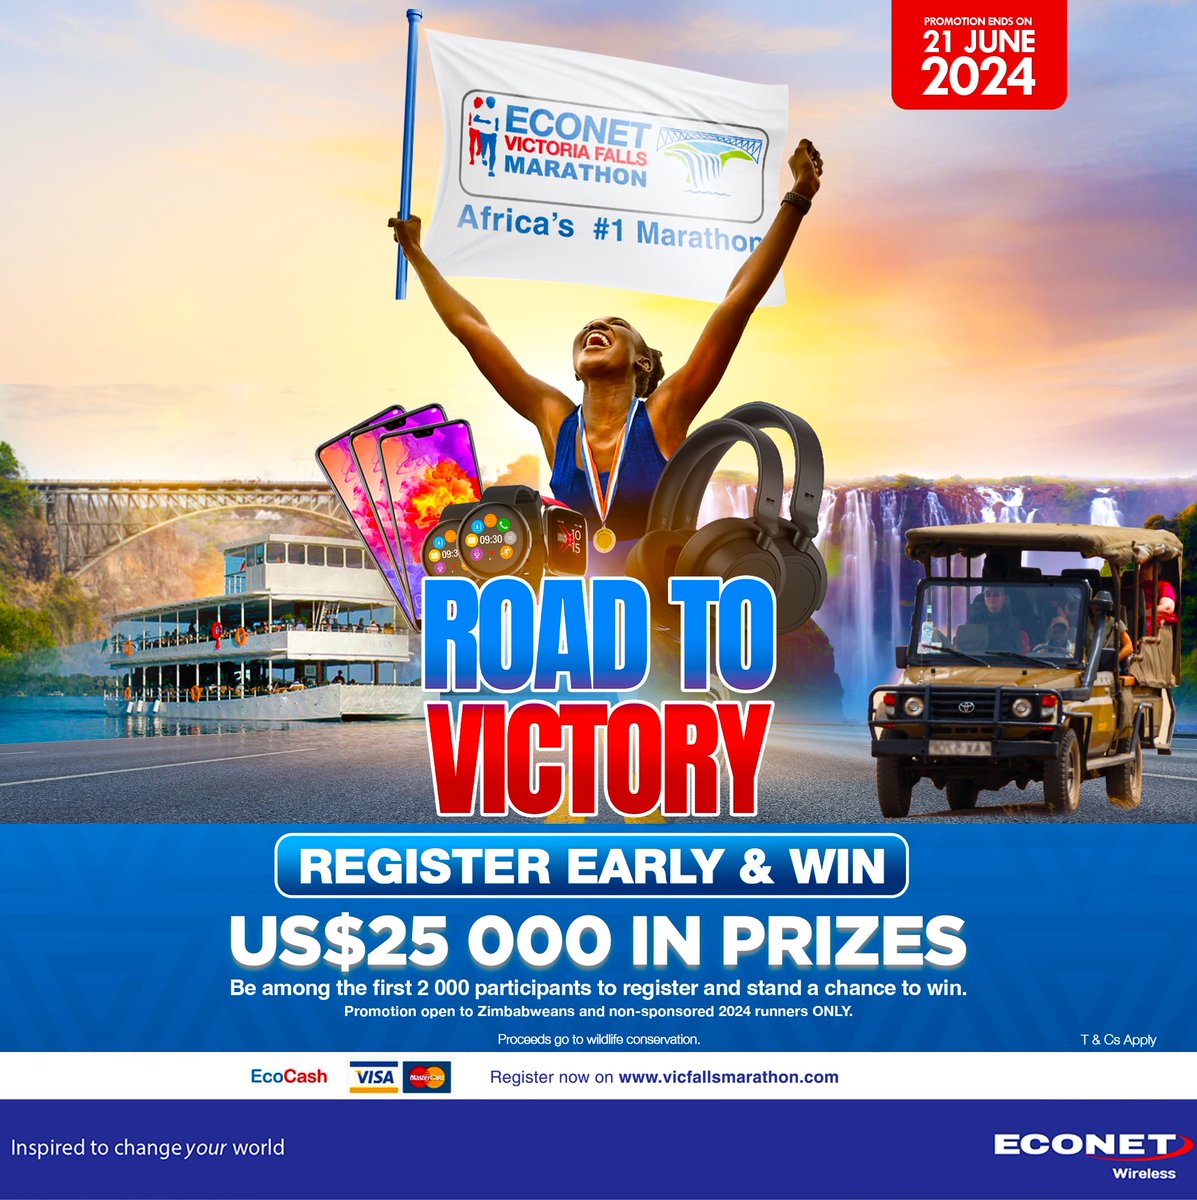 🏃‍♀️Road to Victory🏃‍♂️ Register early and win. Be among the first 2000 participants to register and stand a chance to win. Visit: vicfallsmarathon.com to register. #EVFM2024